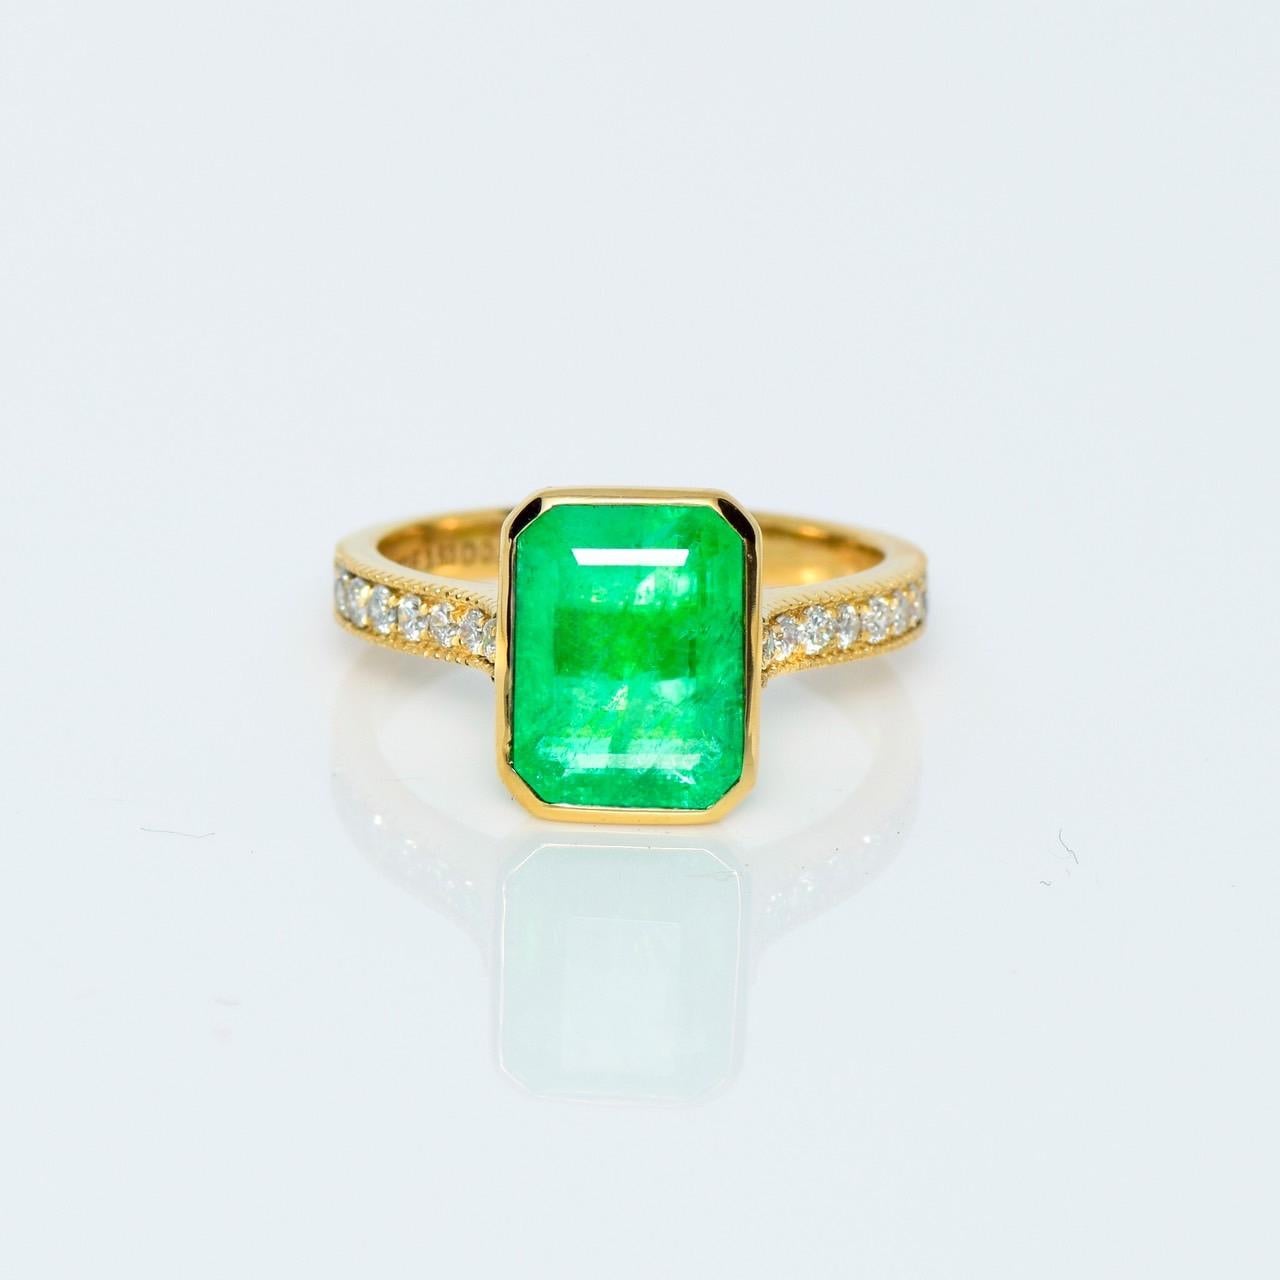 **IGI-Certified 18K Yellow Gold 3.53 Ct Natural Emerald Diamond Antique Art Deco Engagement Ring**

This is a stunning 3.53 ct natural green emerald certified by IGI. It has great luster and is set on an 18K yellow gold bezel with a pave' band that